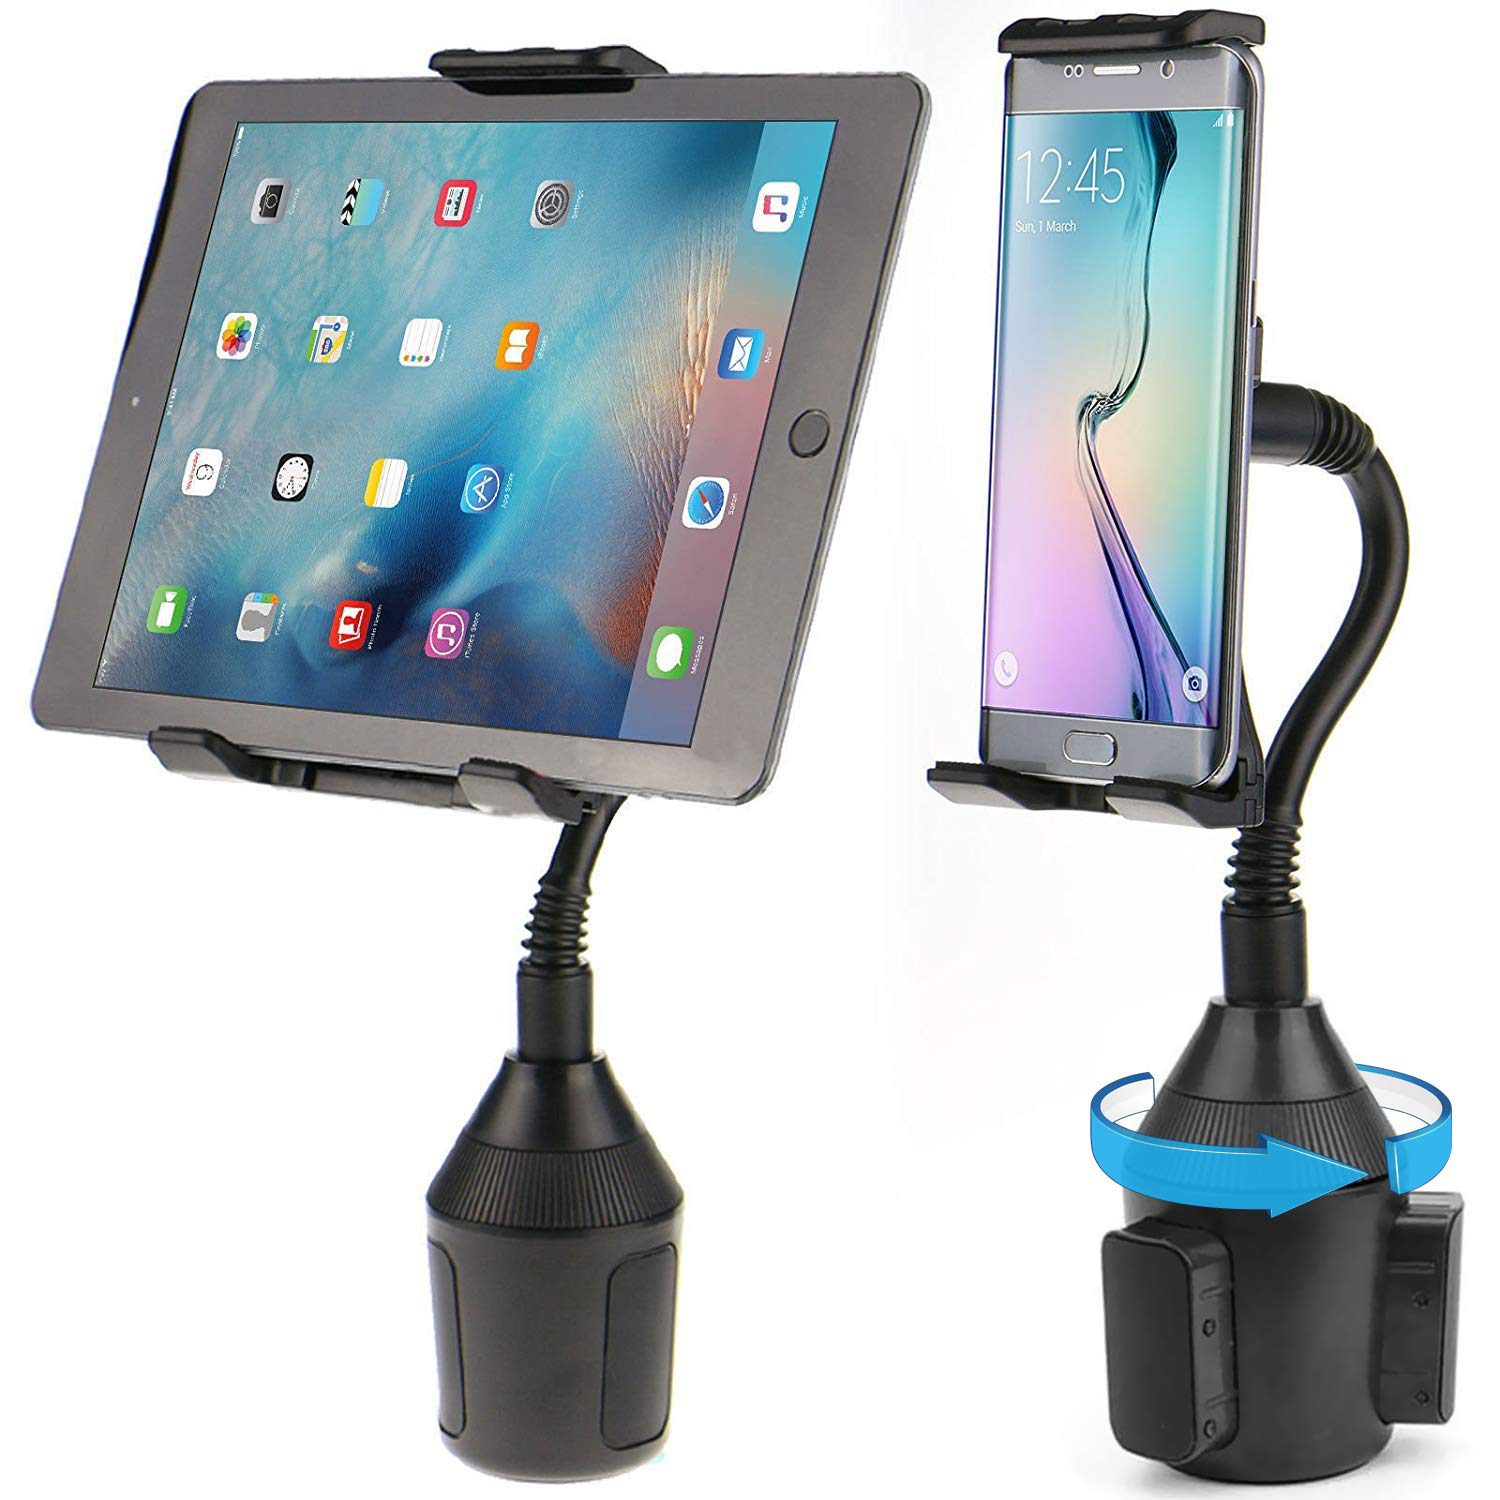 TSV Car Cup Tablet Mount, Universal 360° Adjustable Gooseneck Phone Holder Tablet Stand Fit for iPad, Samsung Tab - image 1 of 8